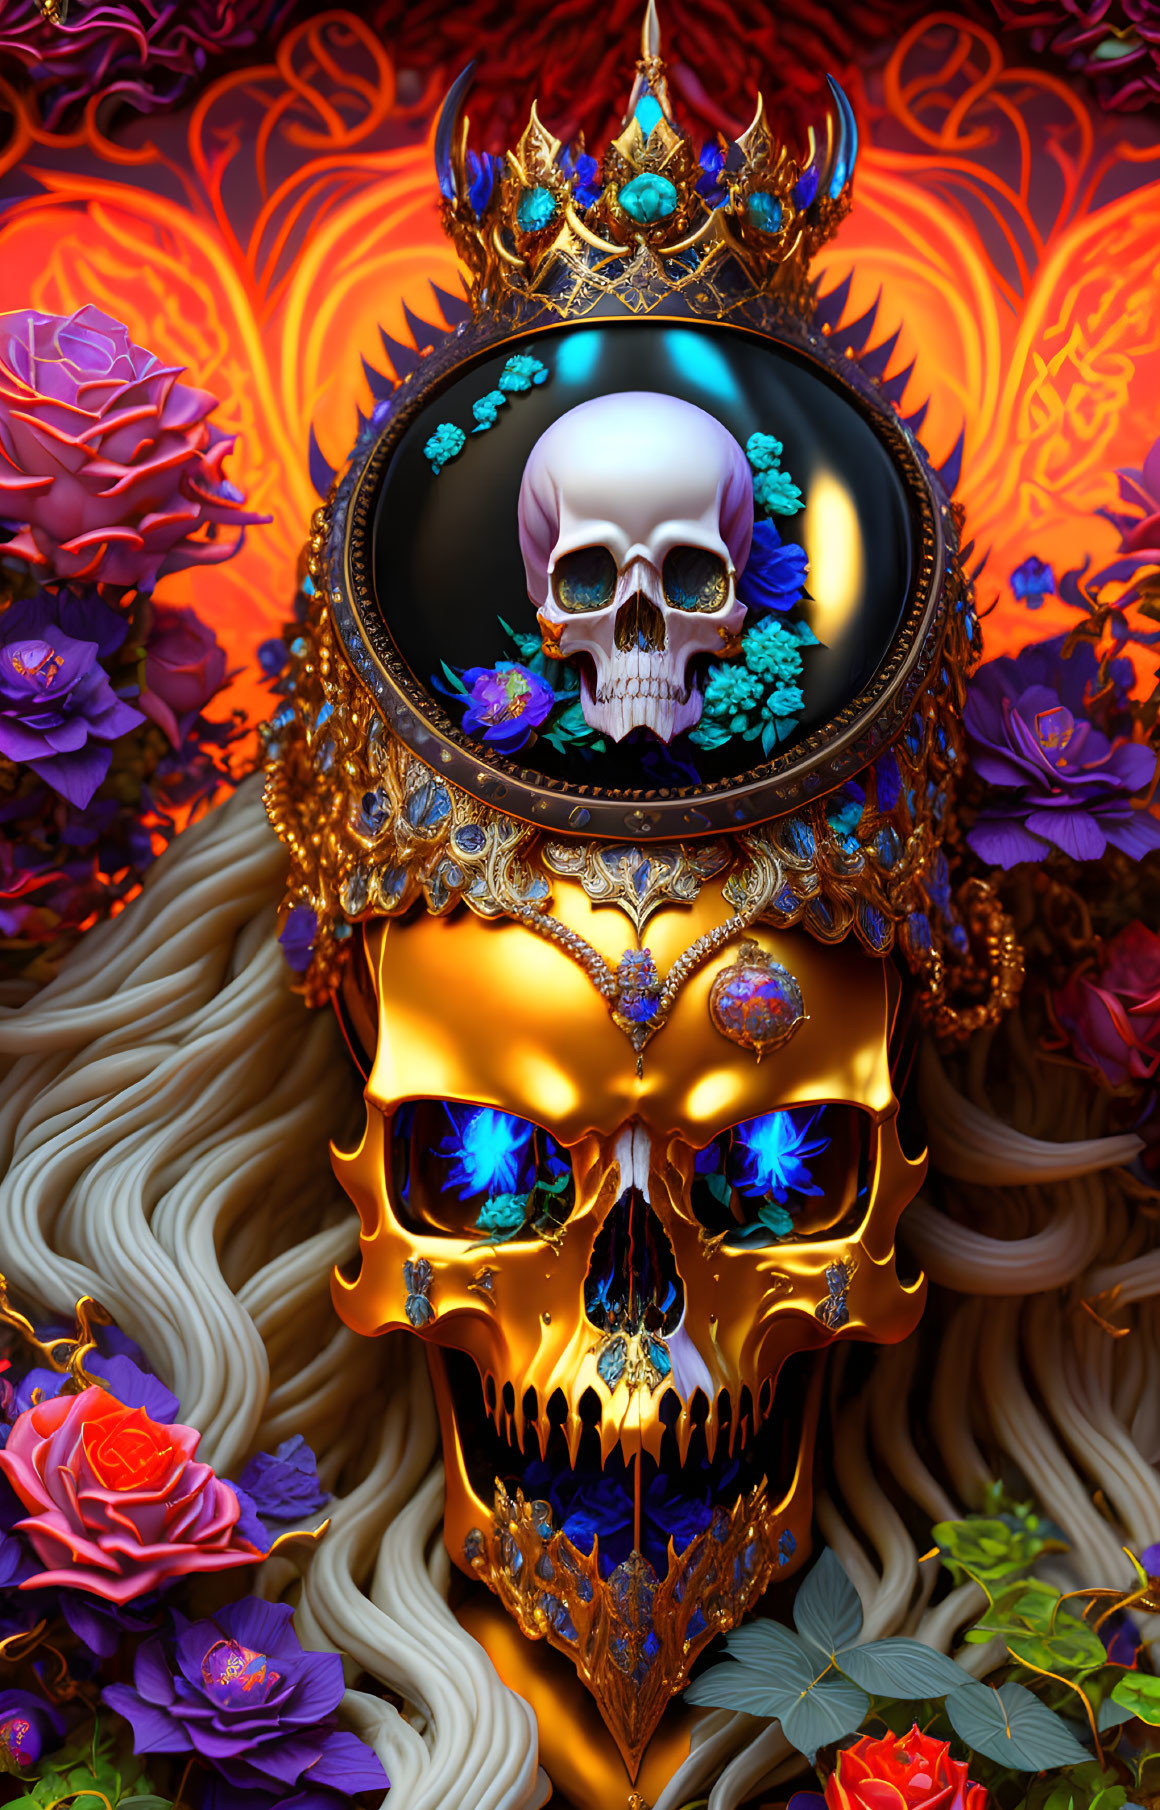 Vibrant digital art: golden ornate skull with jewels, surrounded by flowers, flames, and